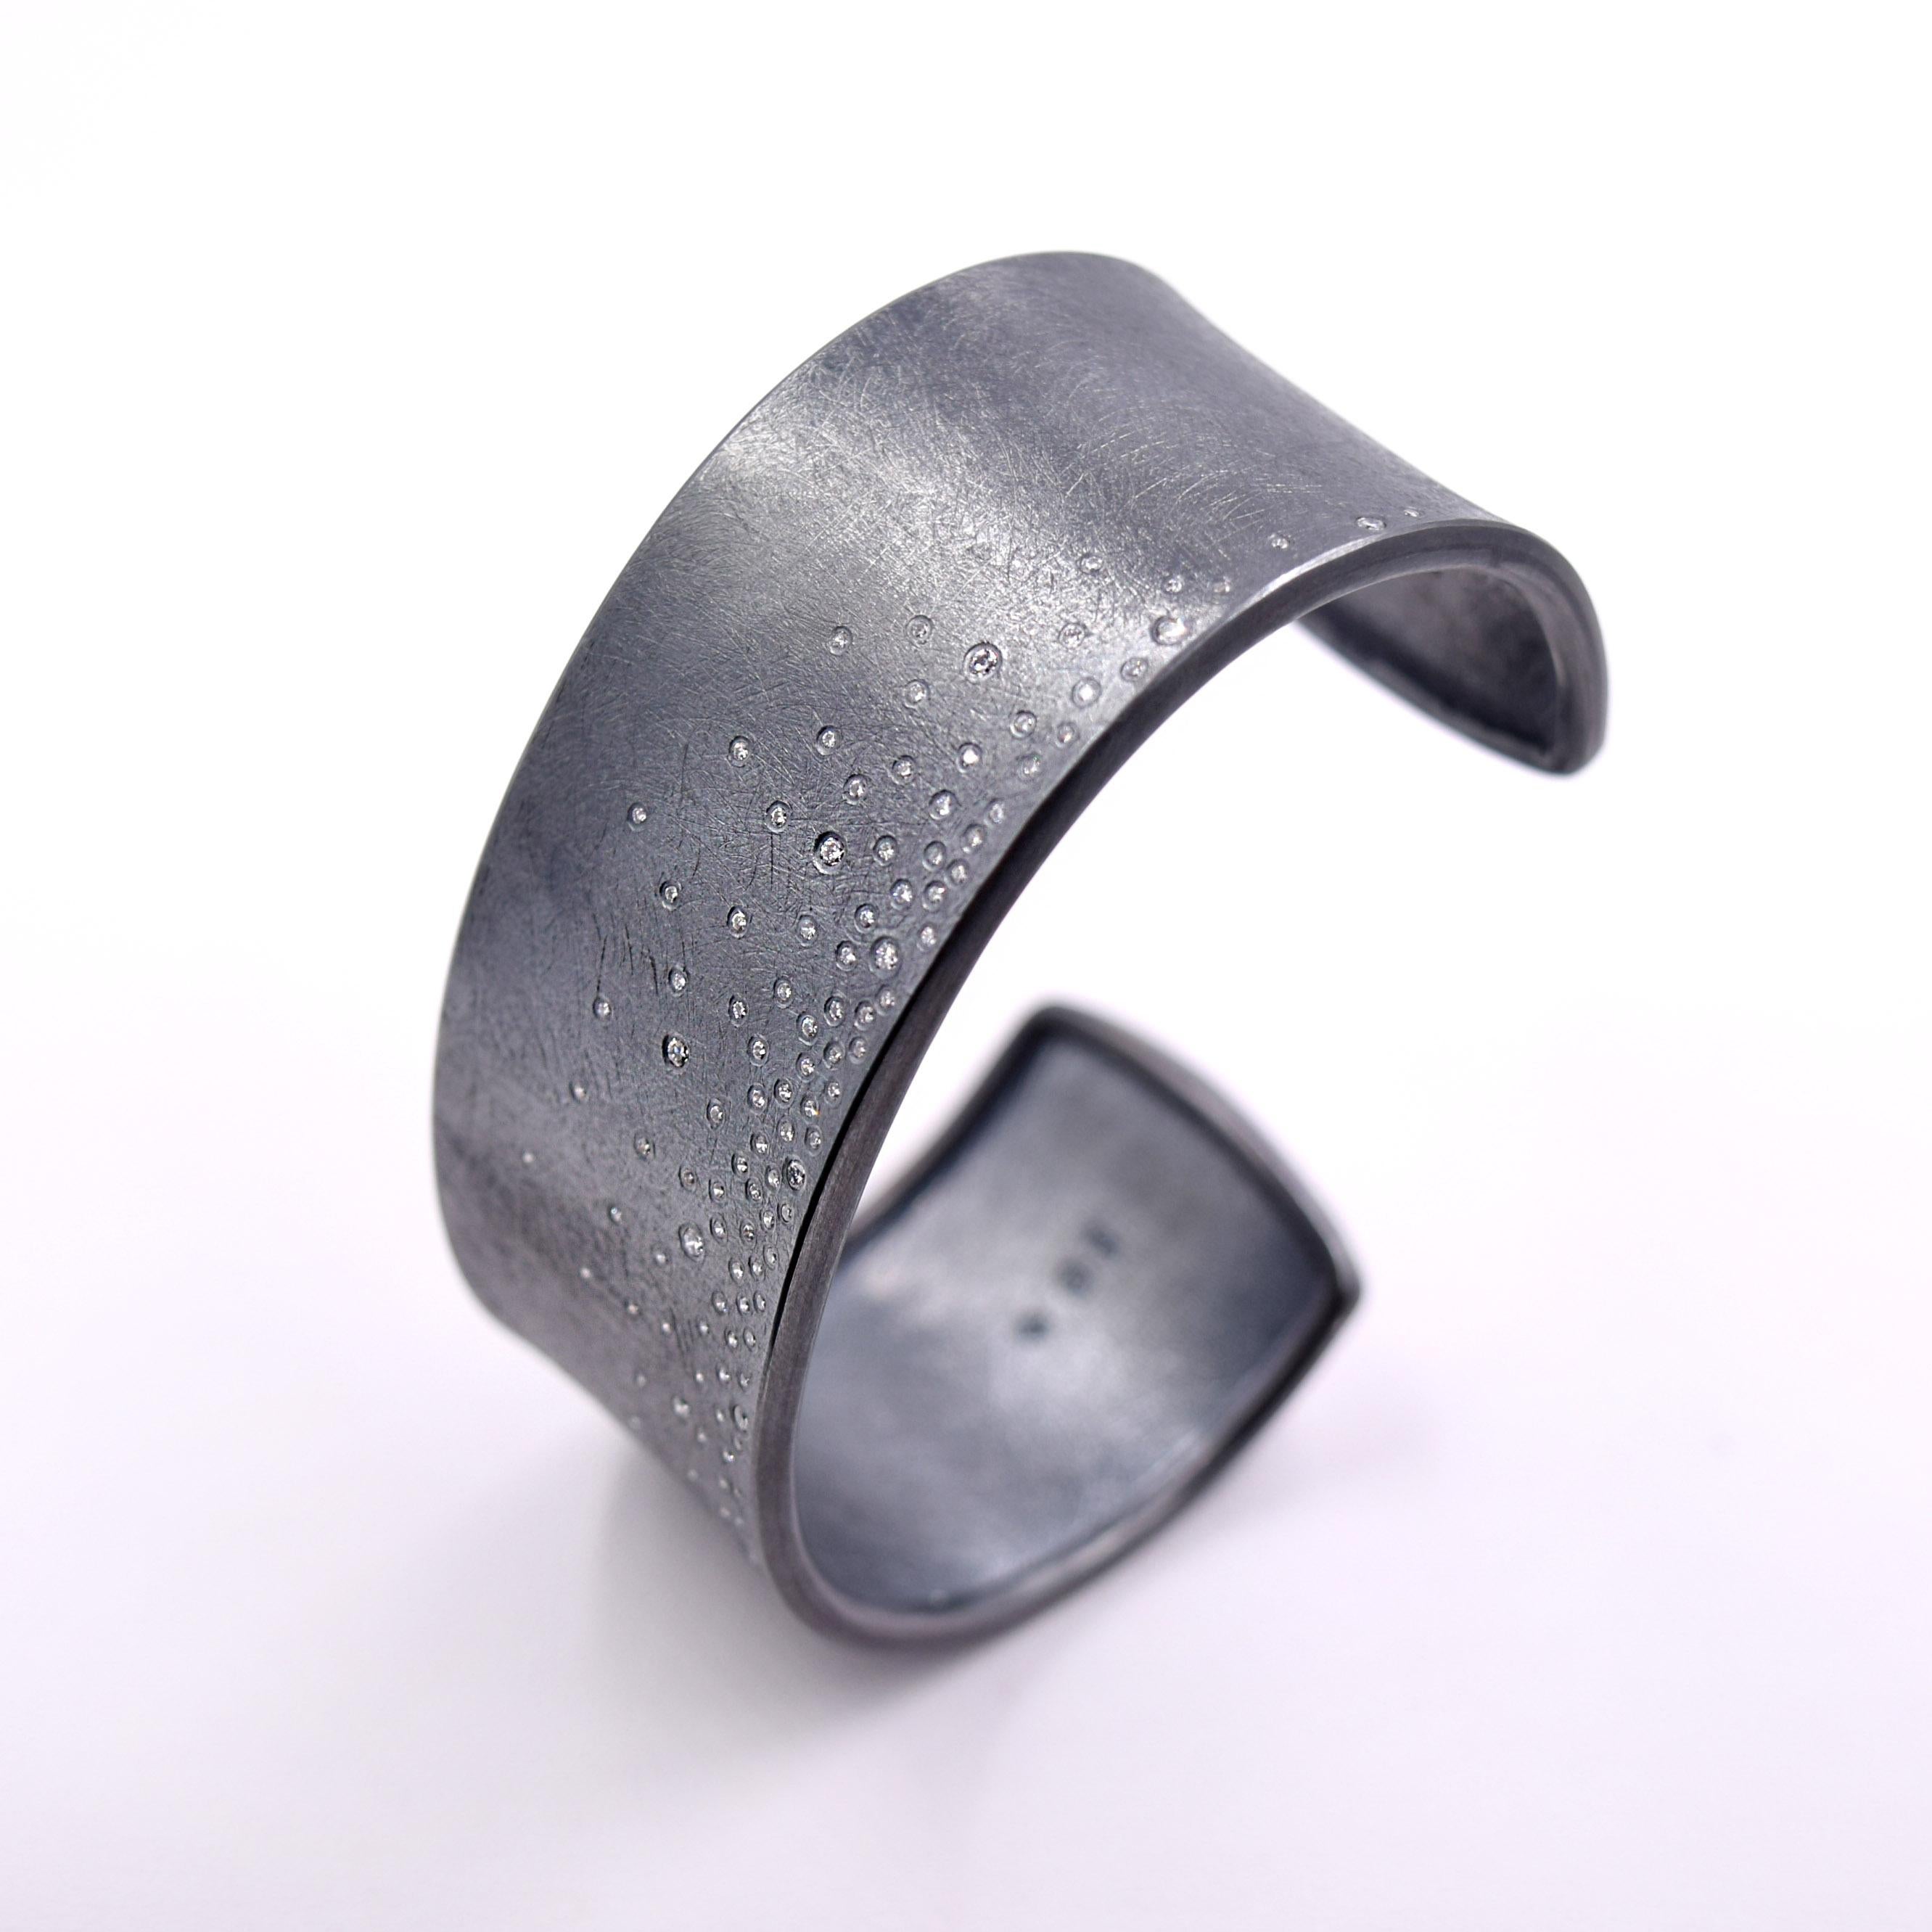 Todd Reed's iconic Bracelet is a hand forged and textured piece of wearable art.
Flush set Diamonds sprinkled throughout the Bracelet give this piece of Jewelry the edgy refinement that Jewelry wearers have come to expect from Todd Reed.
The total